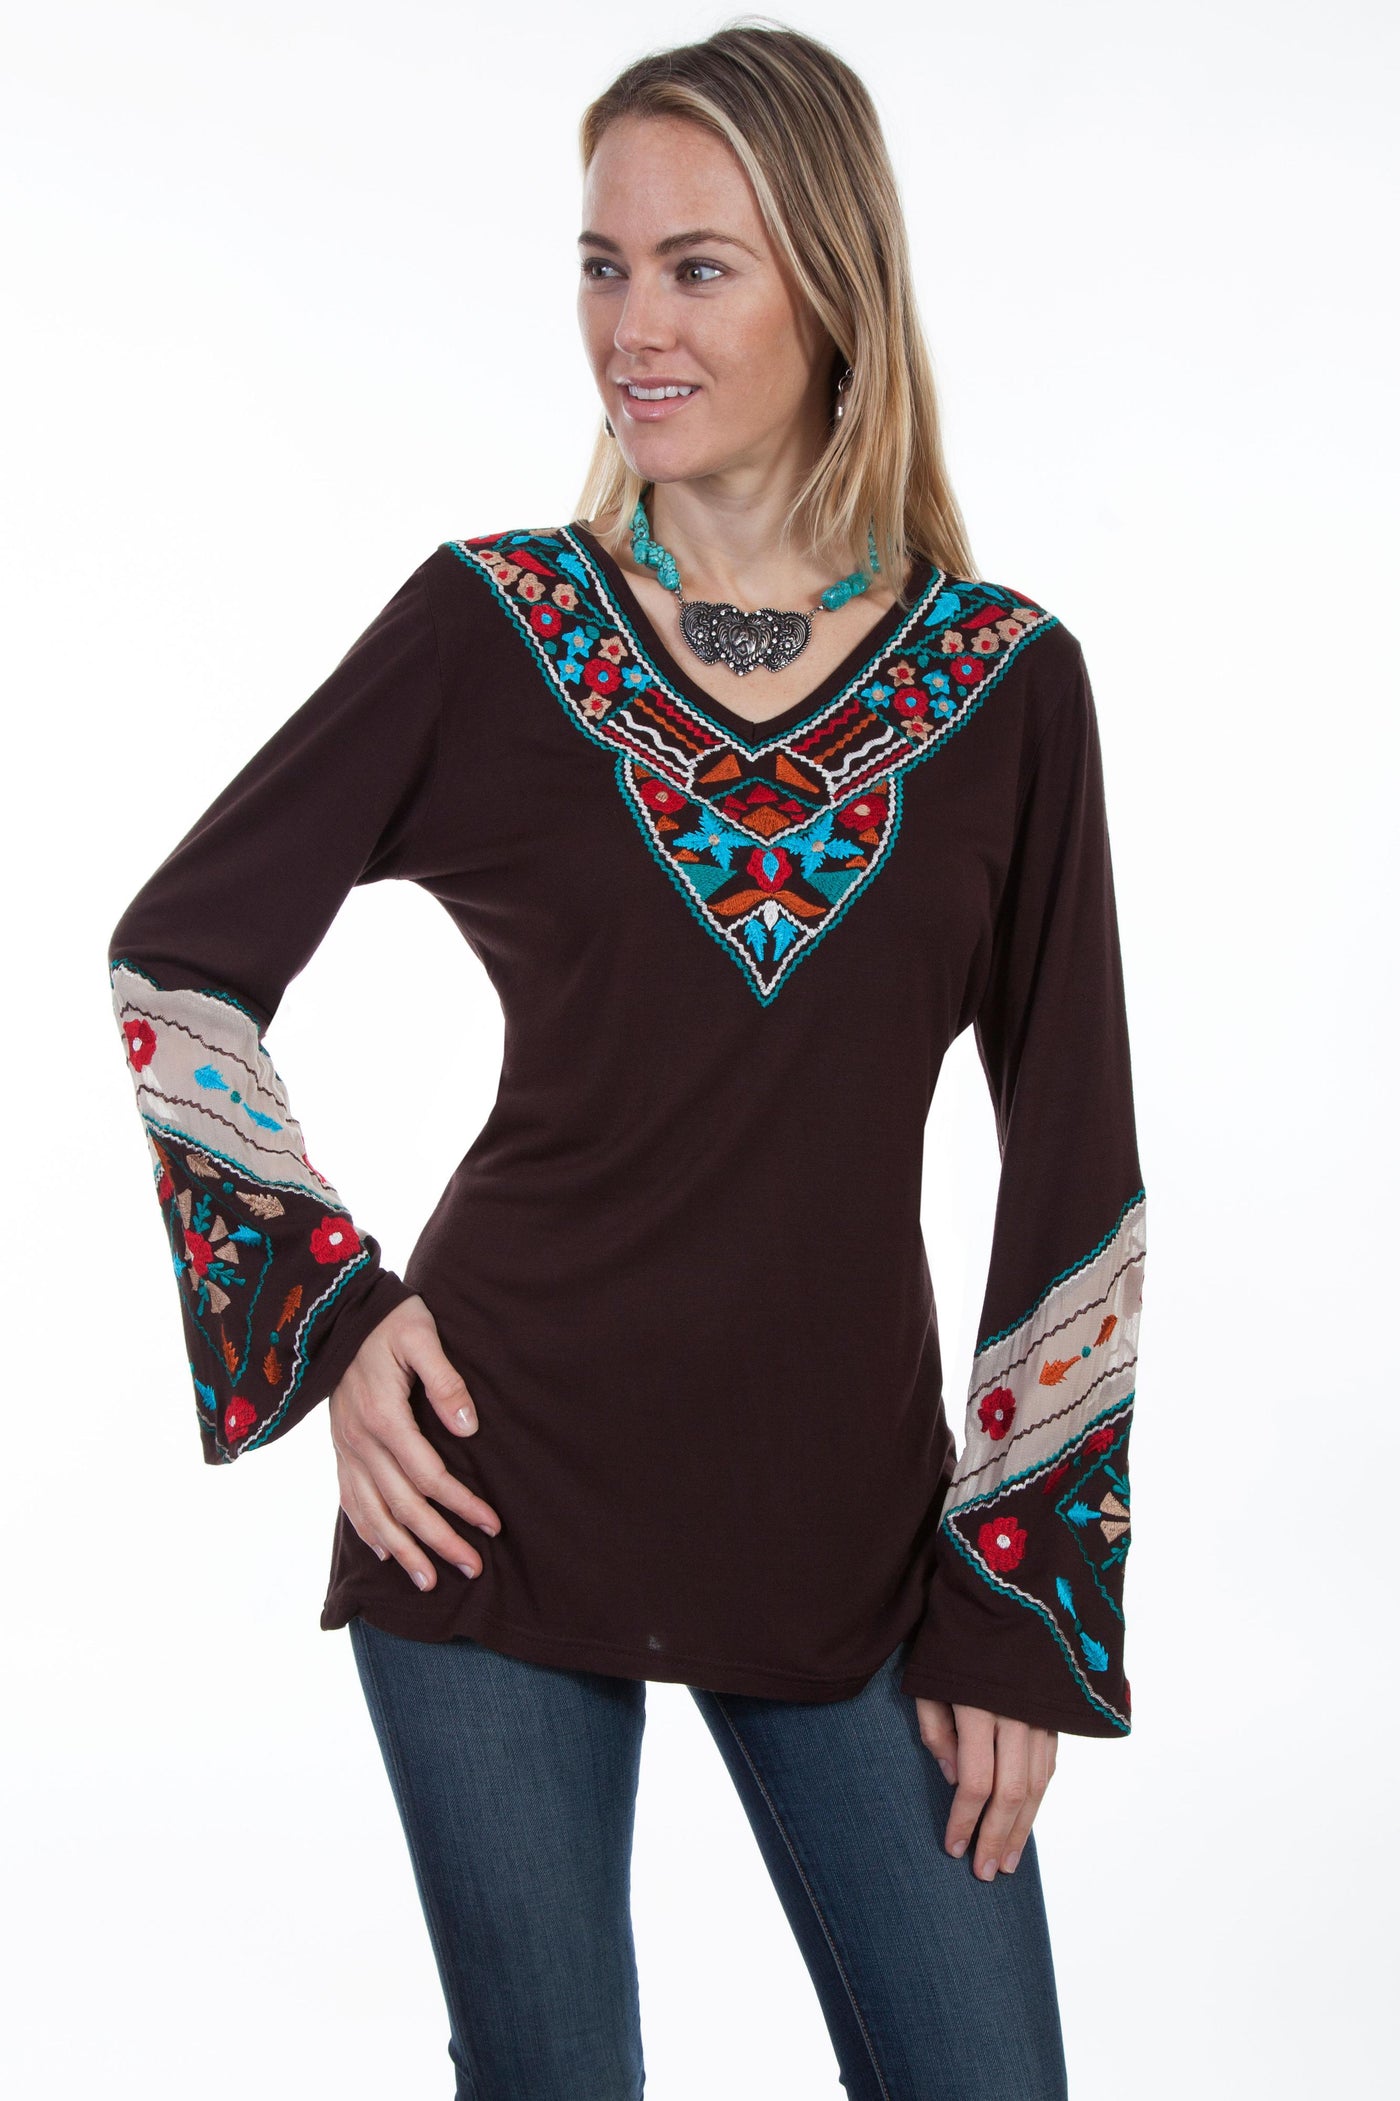 Bohemian Georgette Tunic in Chocolate - SOLD OUT